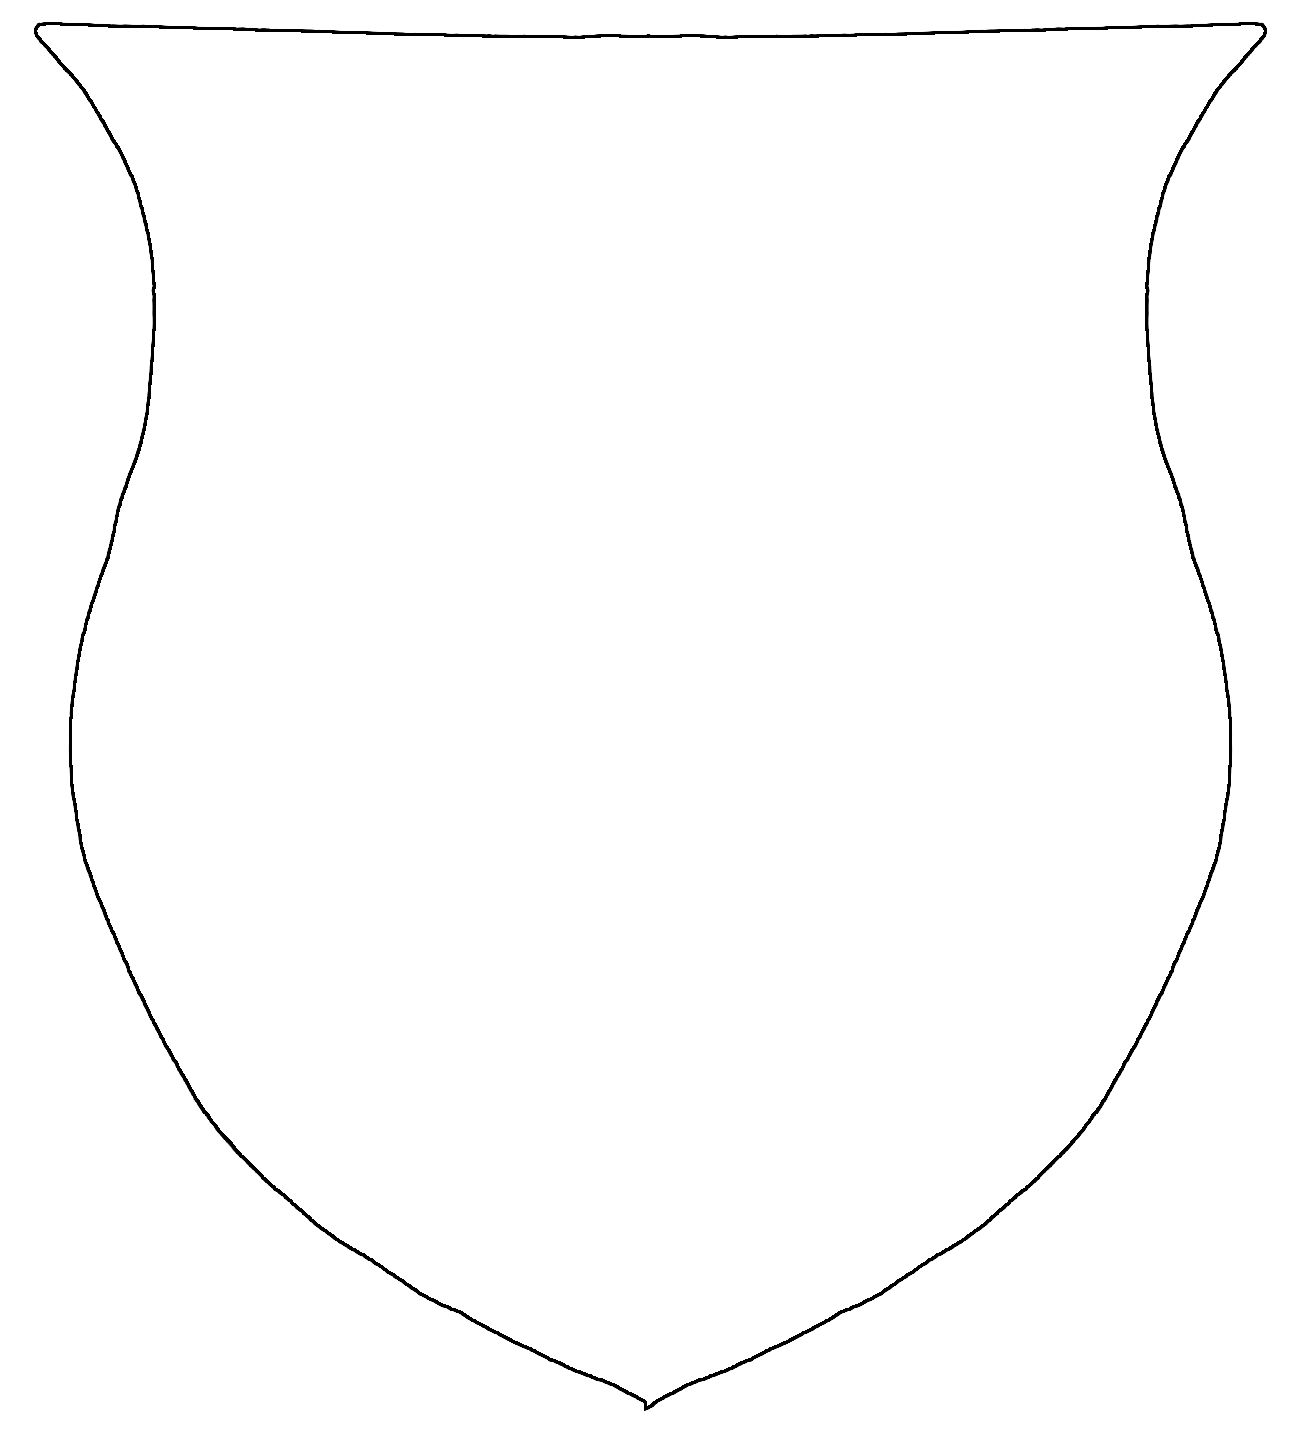 Shield coloring page - Coloring Pages & Pictures - IMAGIXS ...